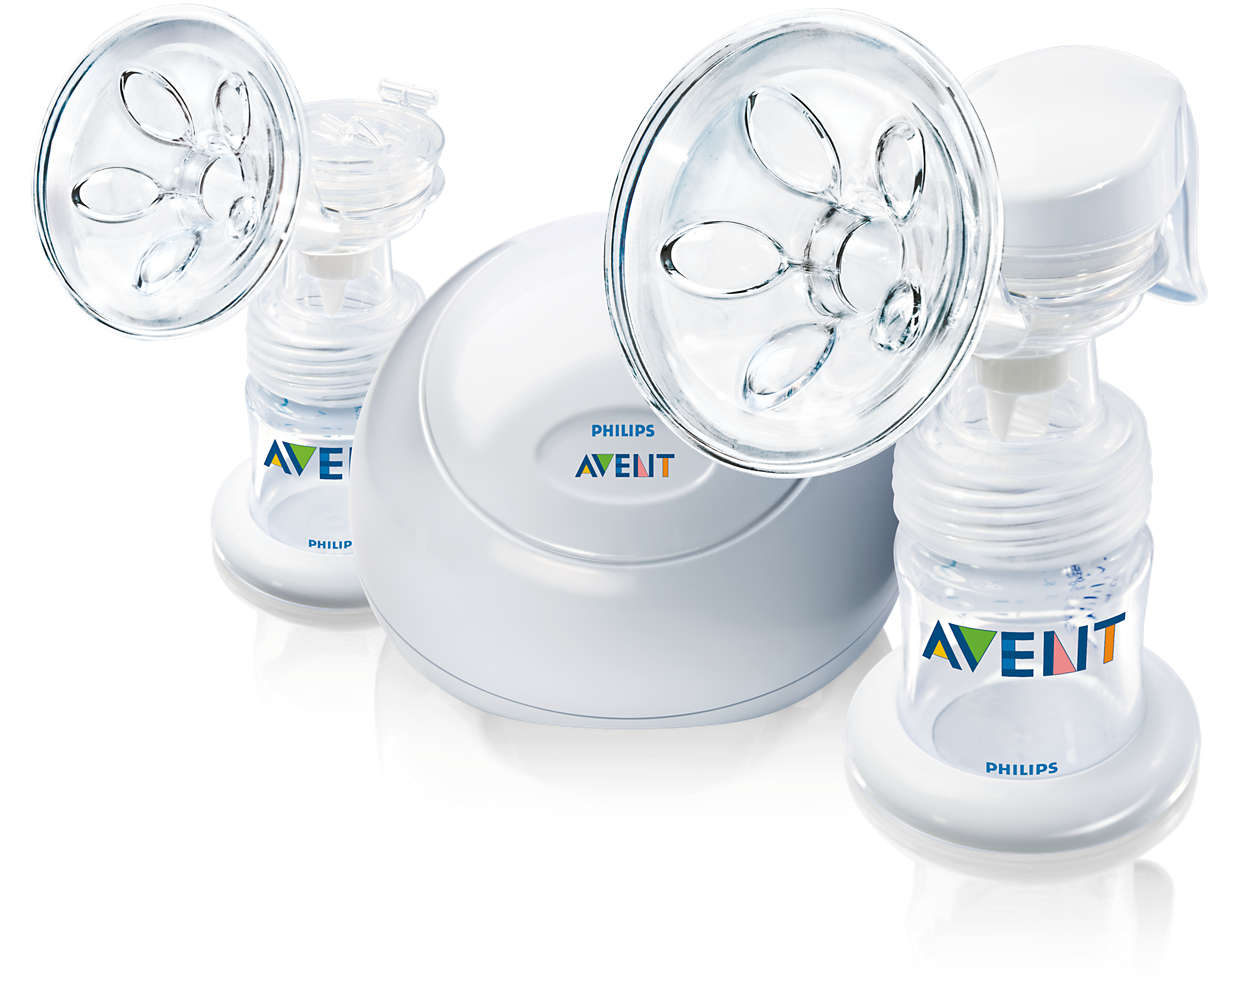 avent electric breast pump instructions